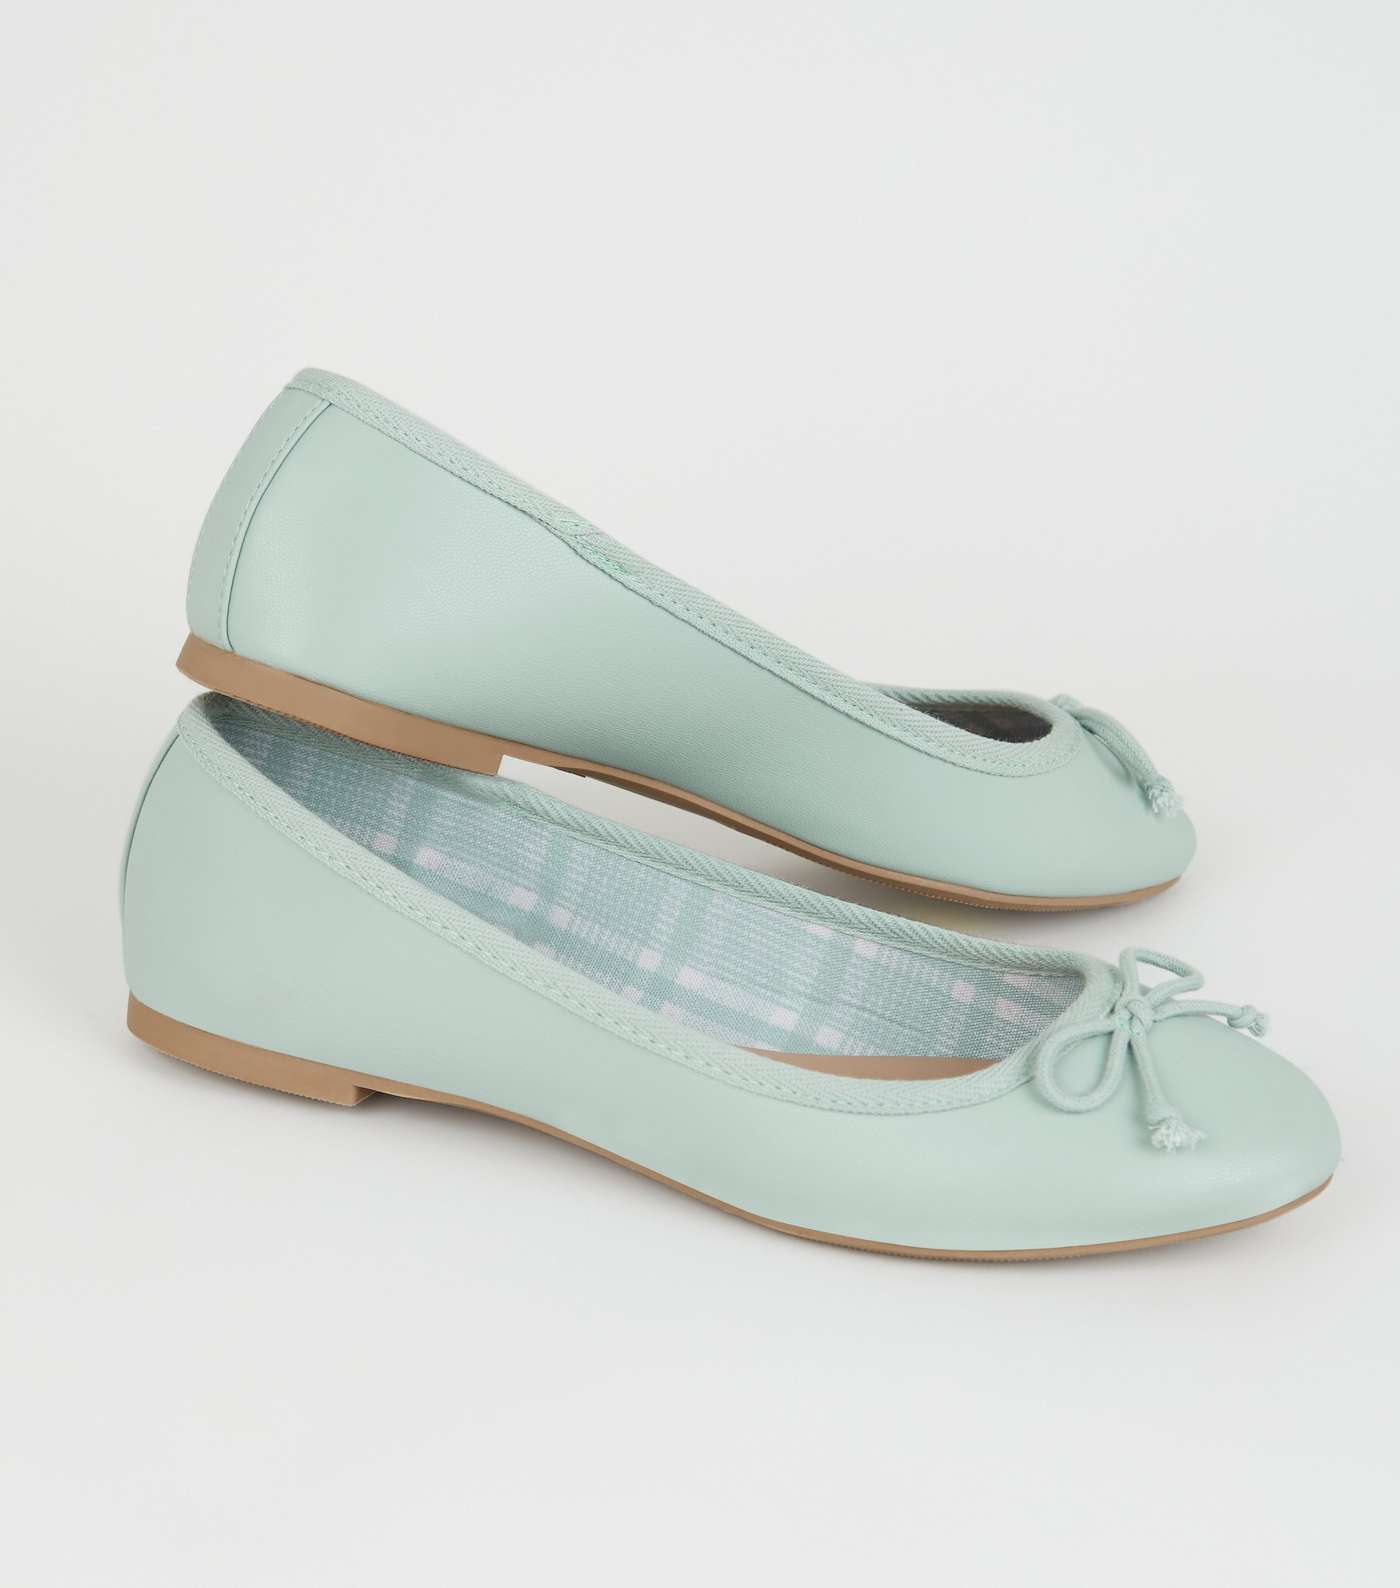 Mint Green Leather-Look Check Lined Ballet Pumps Image 3